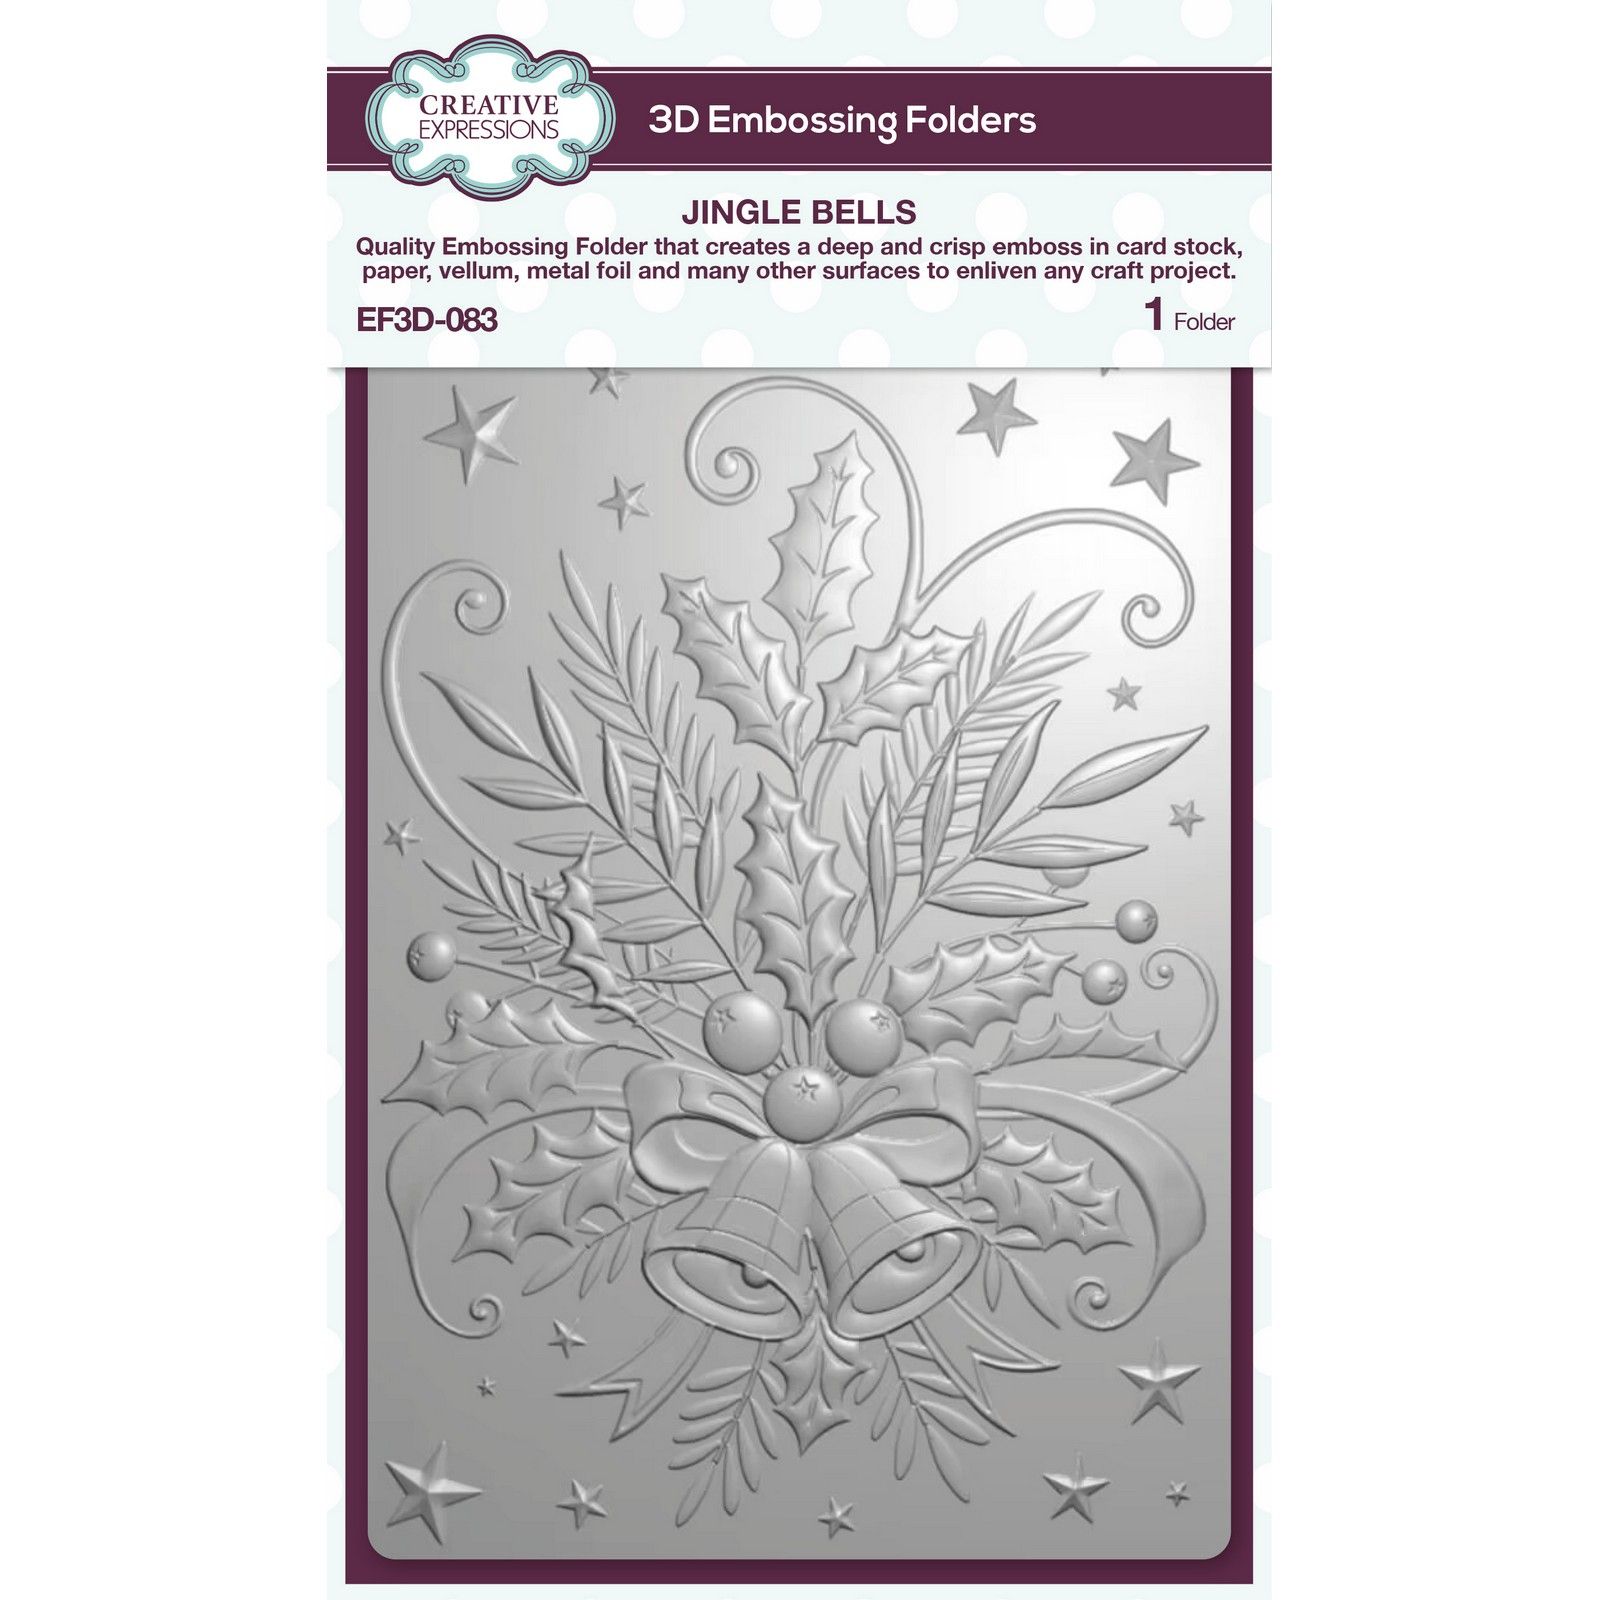 Creative Expressions • Jingle Bells 5 in x 7 in 3D Embossing Folder